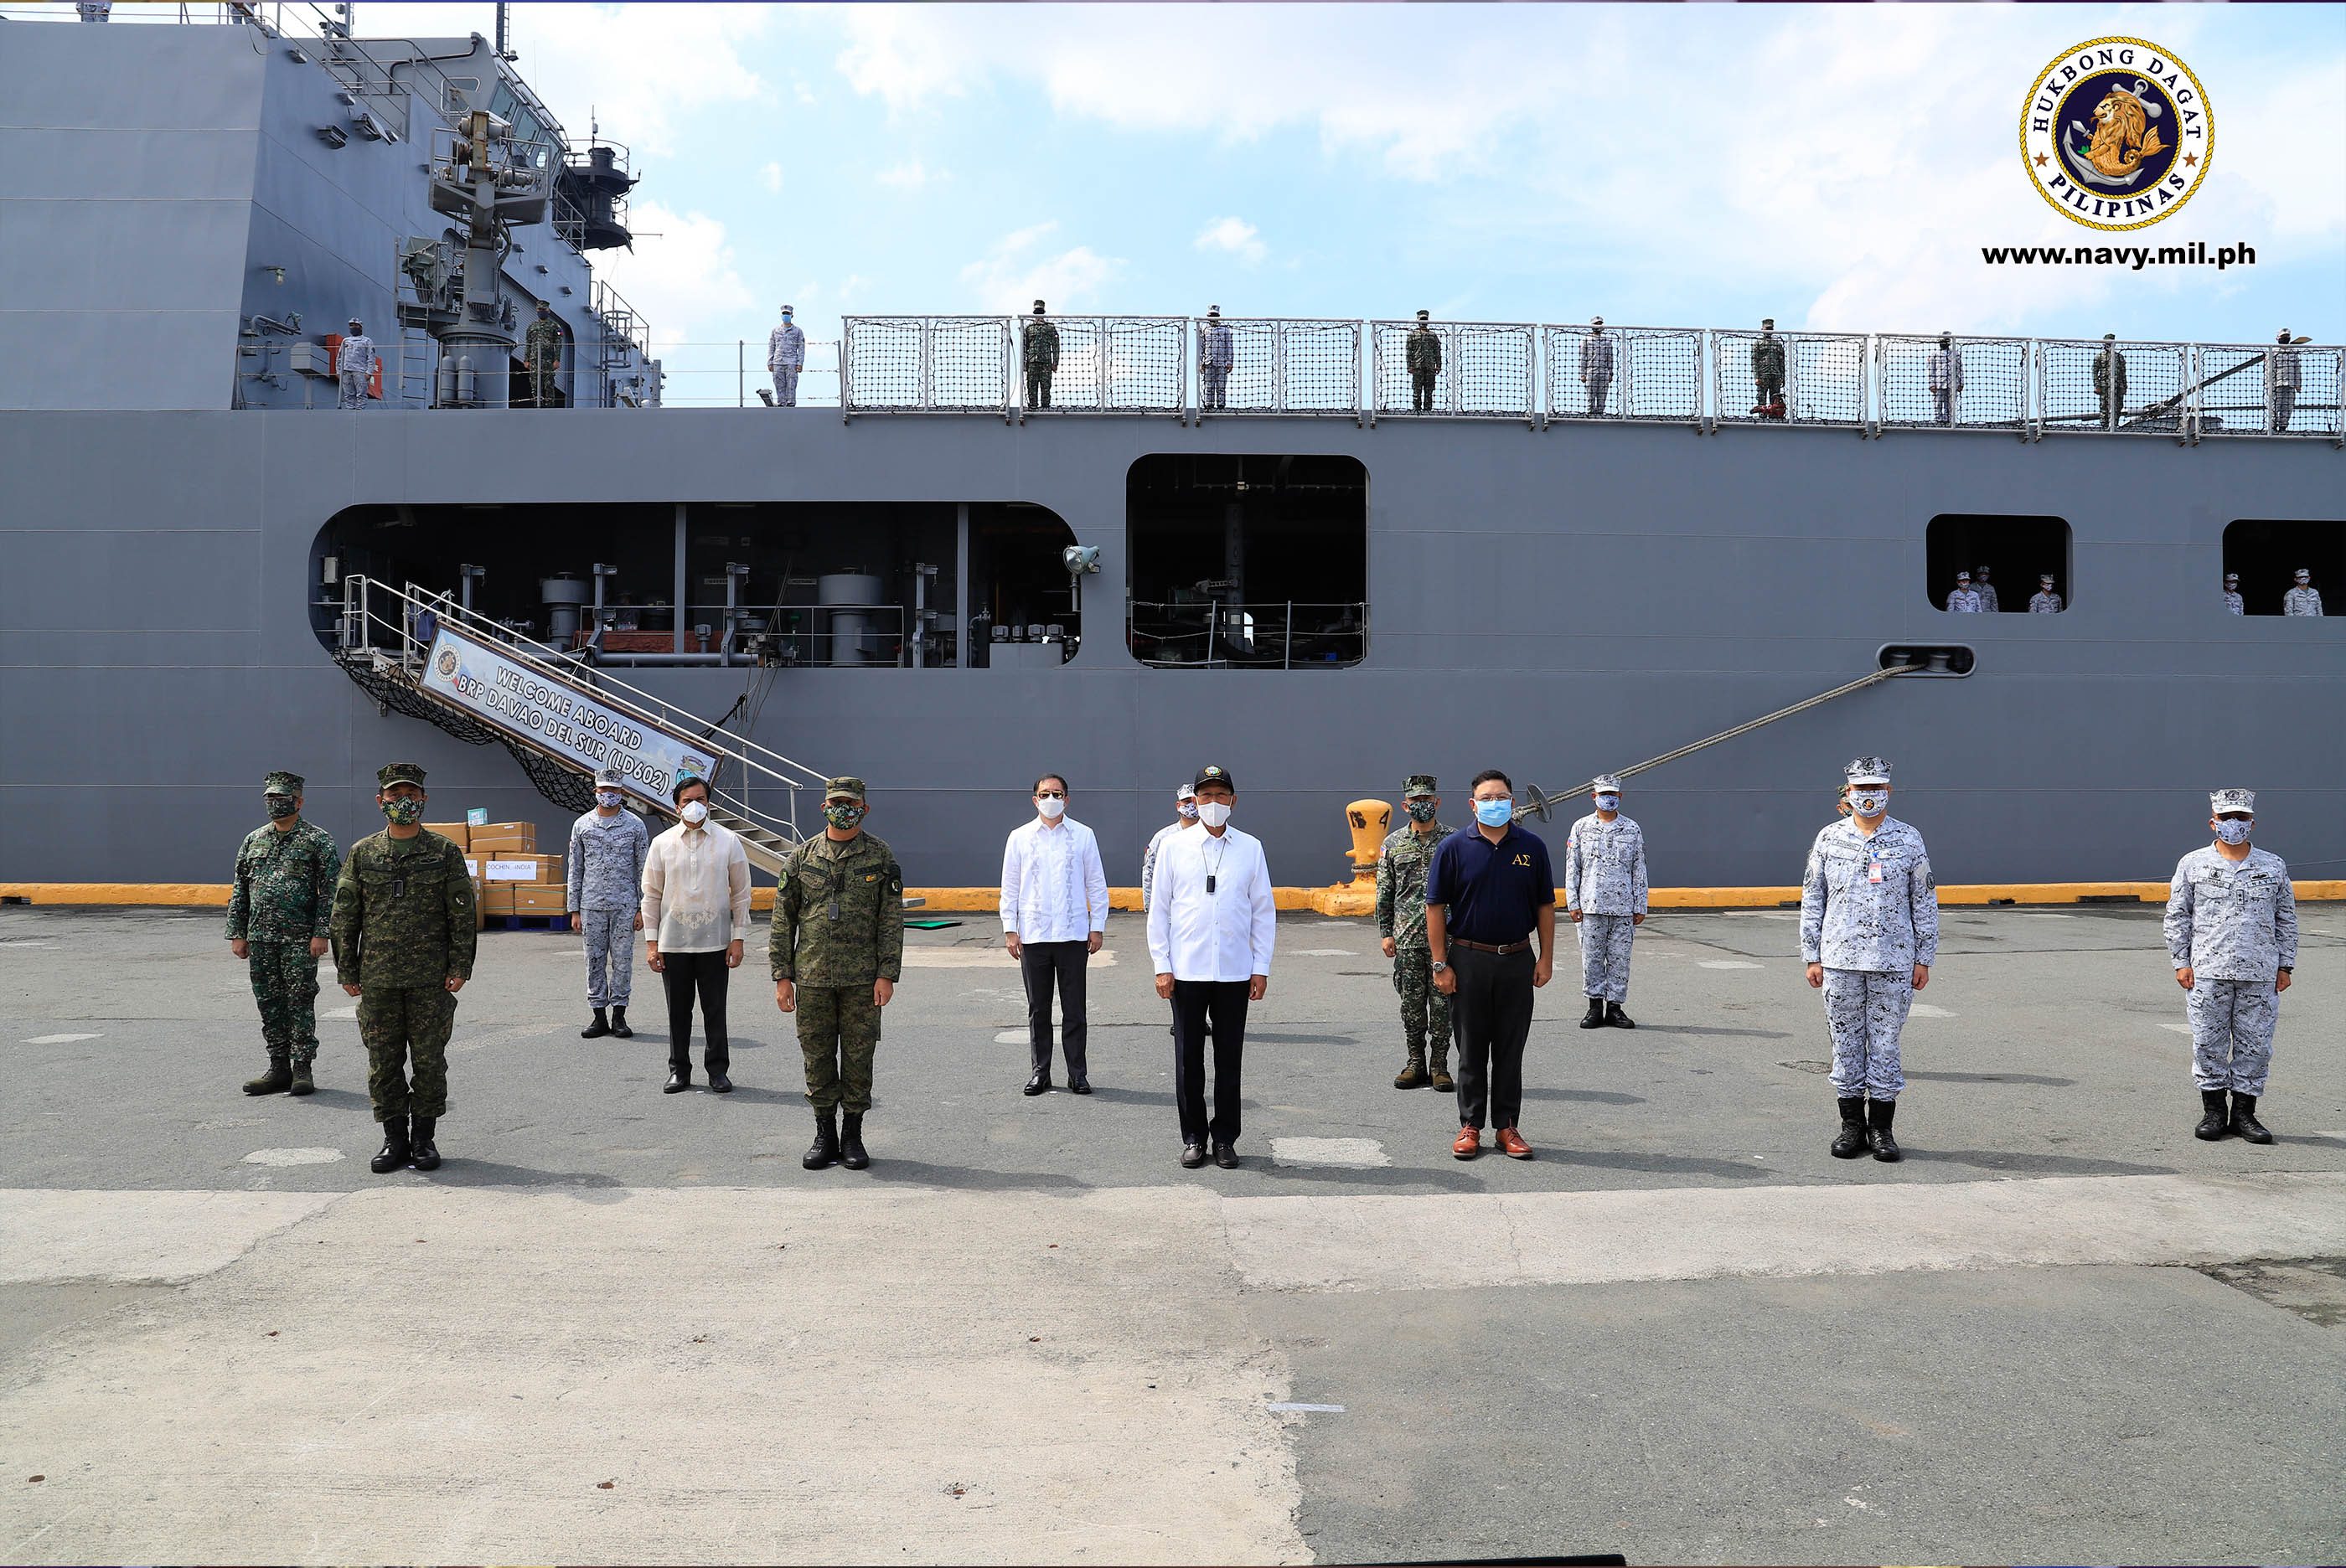 TOP BRASS. Defense Secretary Delfin Lorenzana, military chief General Felimon Santos Jr, and Navy chief Vice Admiral Giovanni Carlo Bacordo welcomed Naval Task Force 82 at the Manila South Harbor on June 16, 2020. Photo from the Philippine Navy 